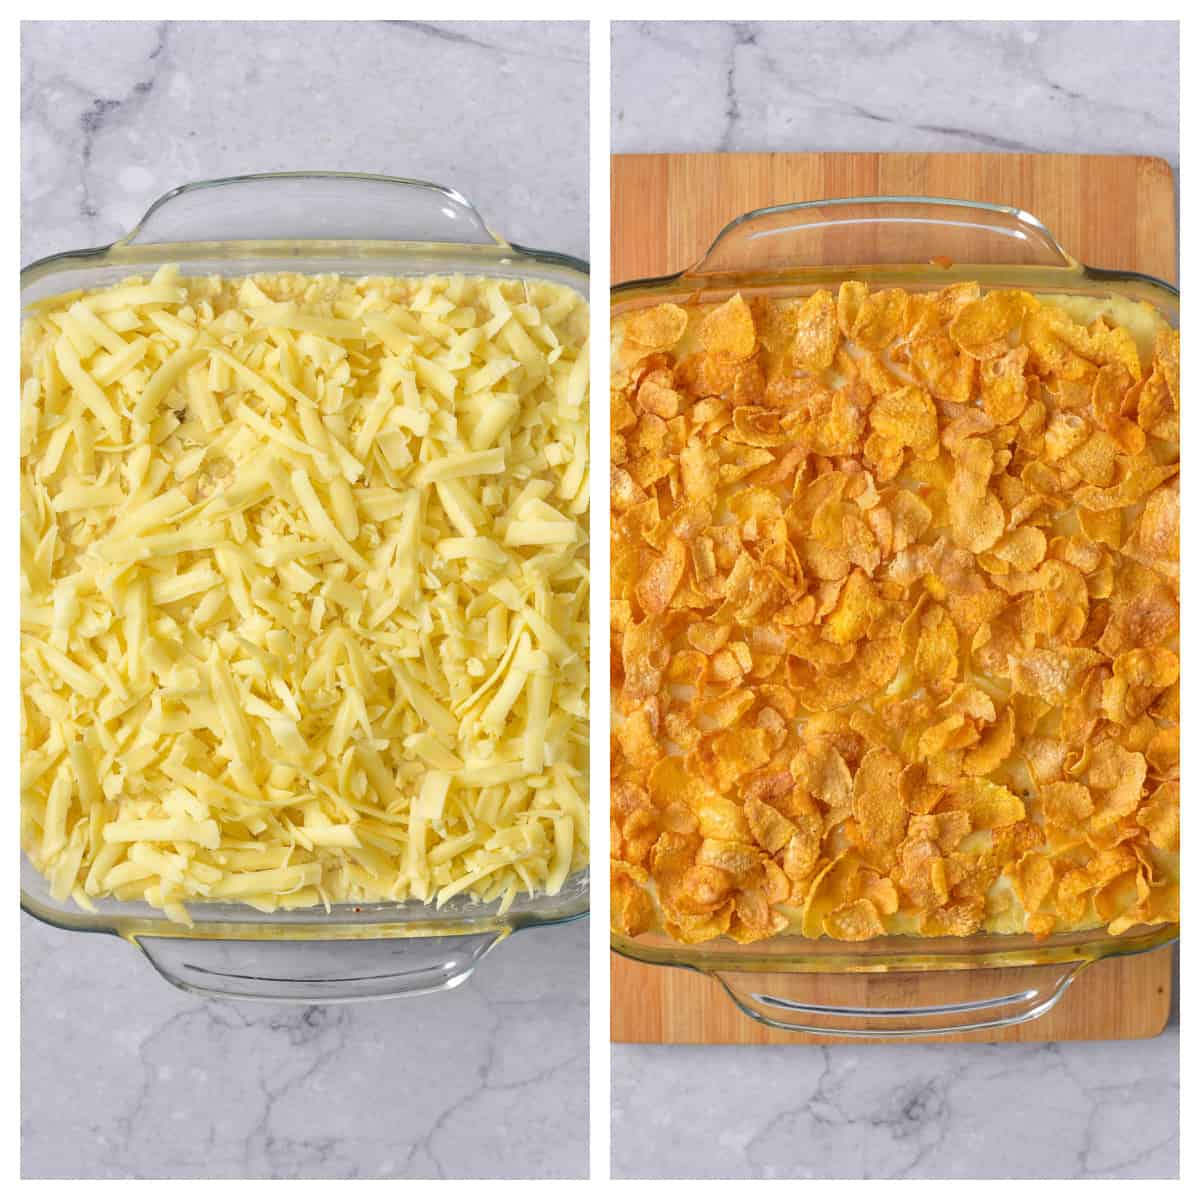 Adding the cheese to the casserole, then adding cornflakes.